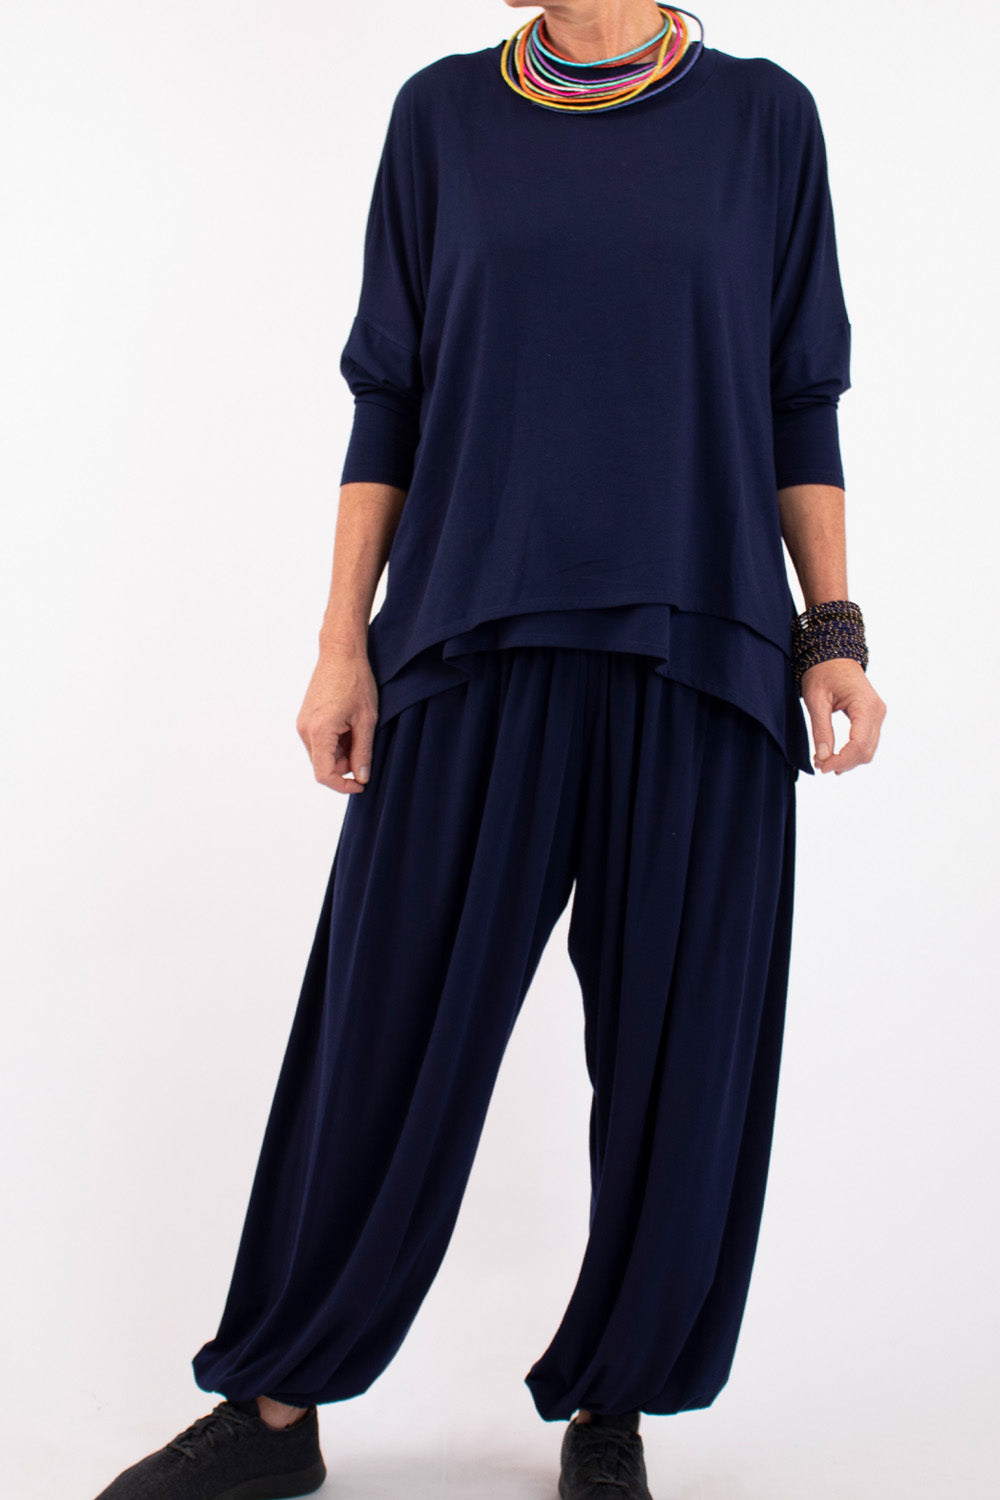 Edna Full Active Pants - Midnight Blue - One Size